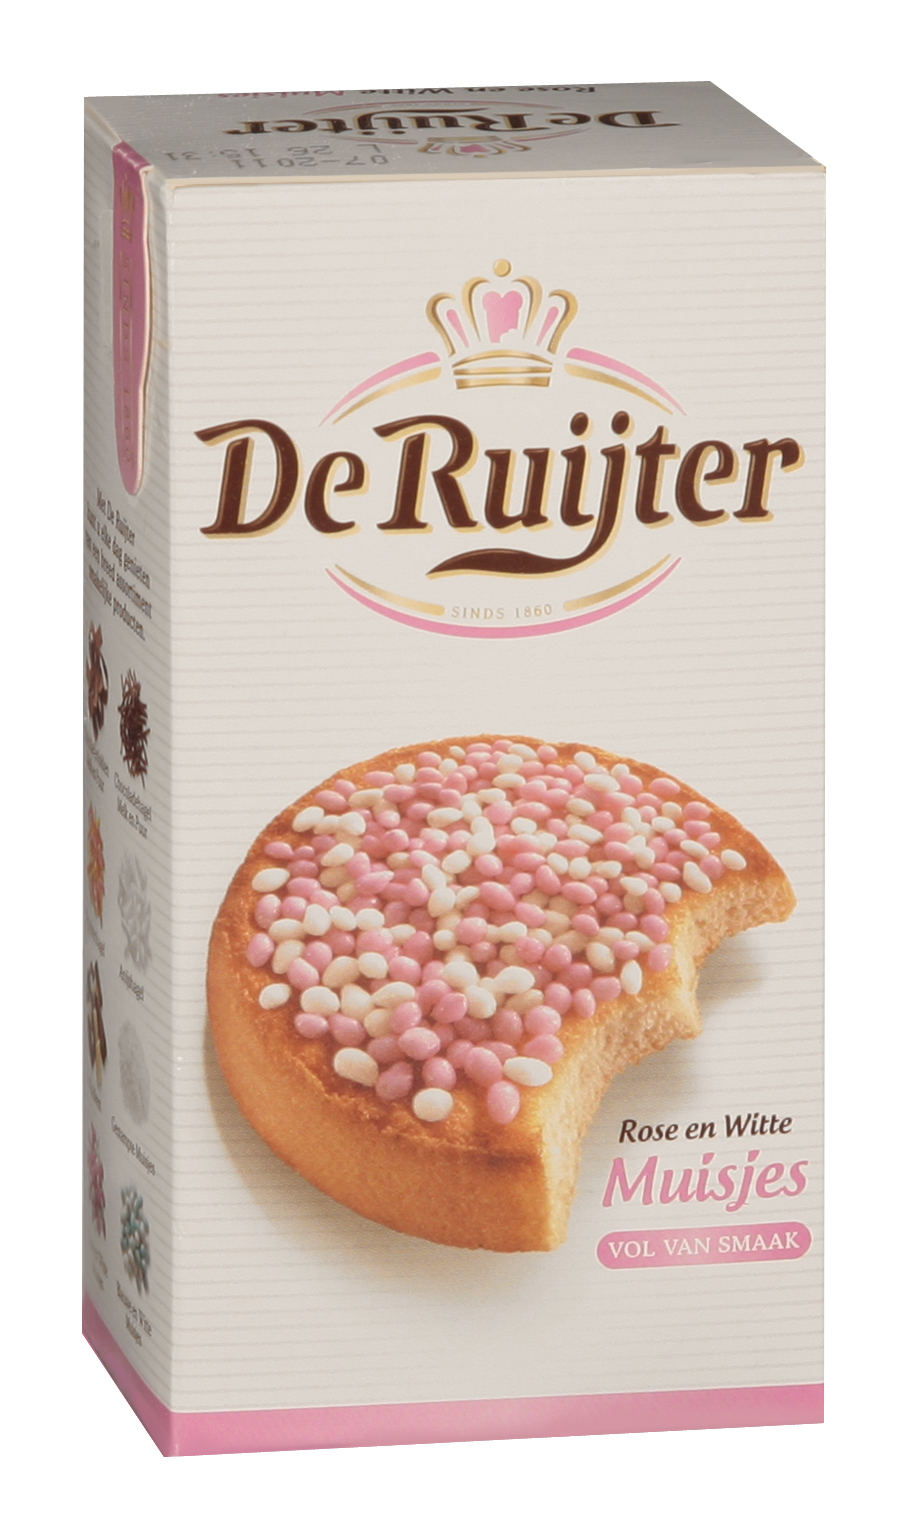 Onophoudelijk fonds Structureel Sugared Aniseed - Pink & White from http://www.thedutchstore.com